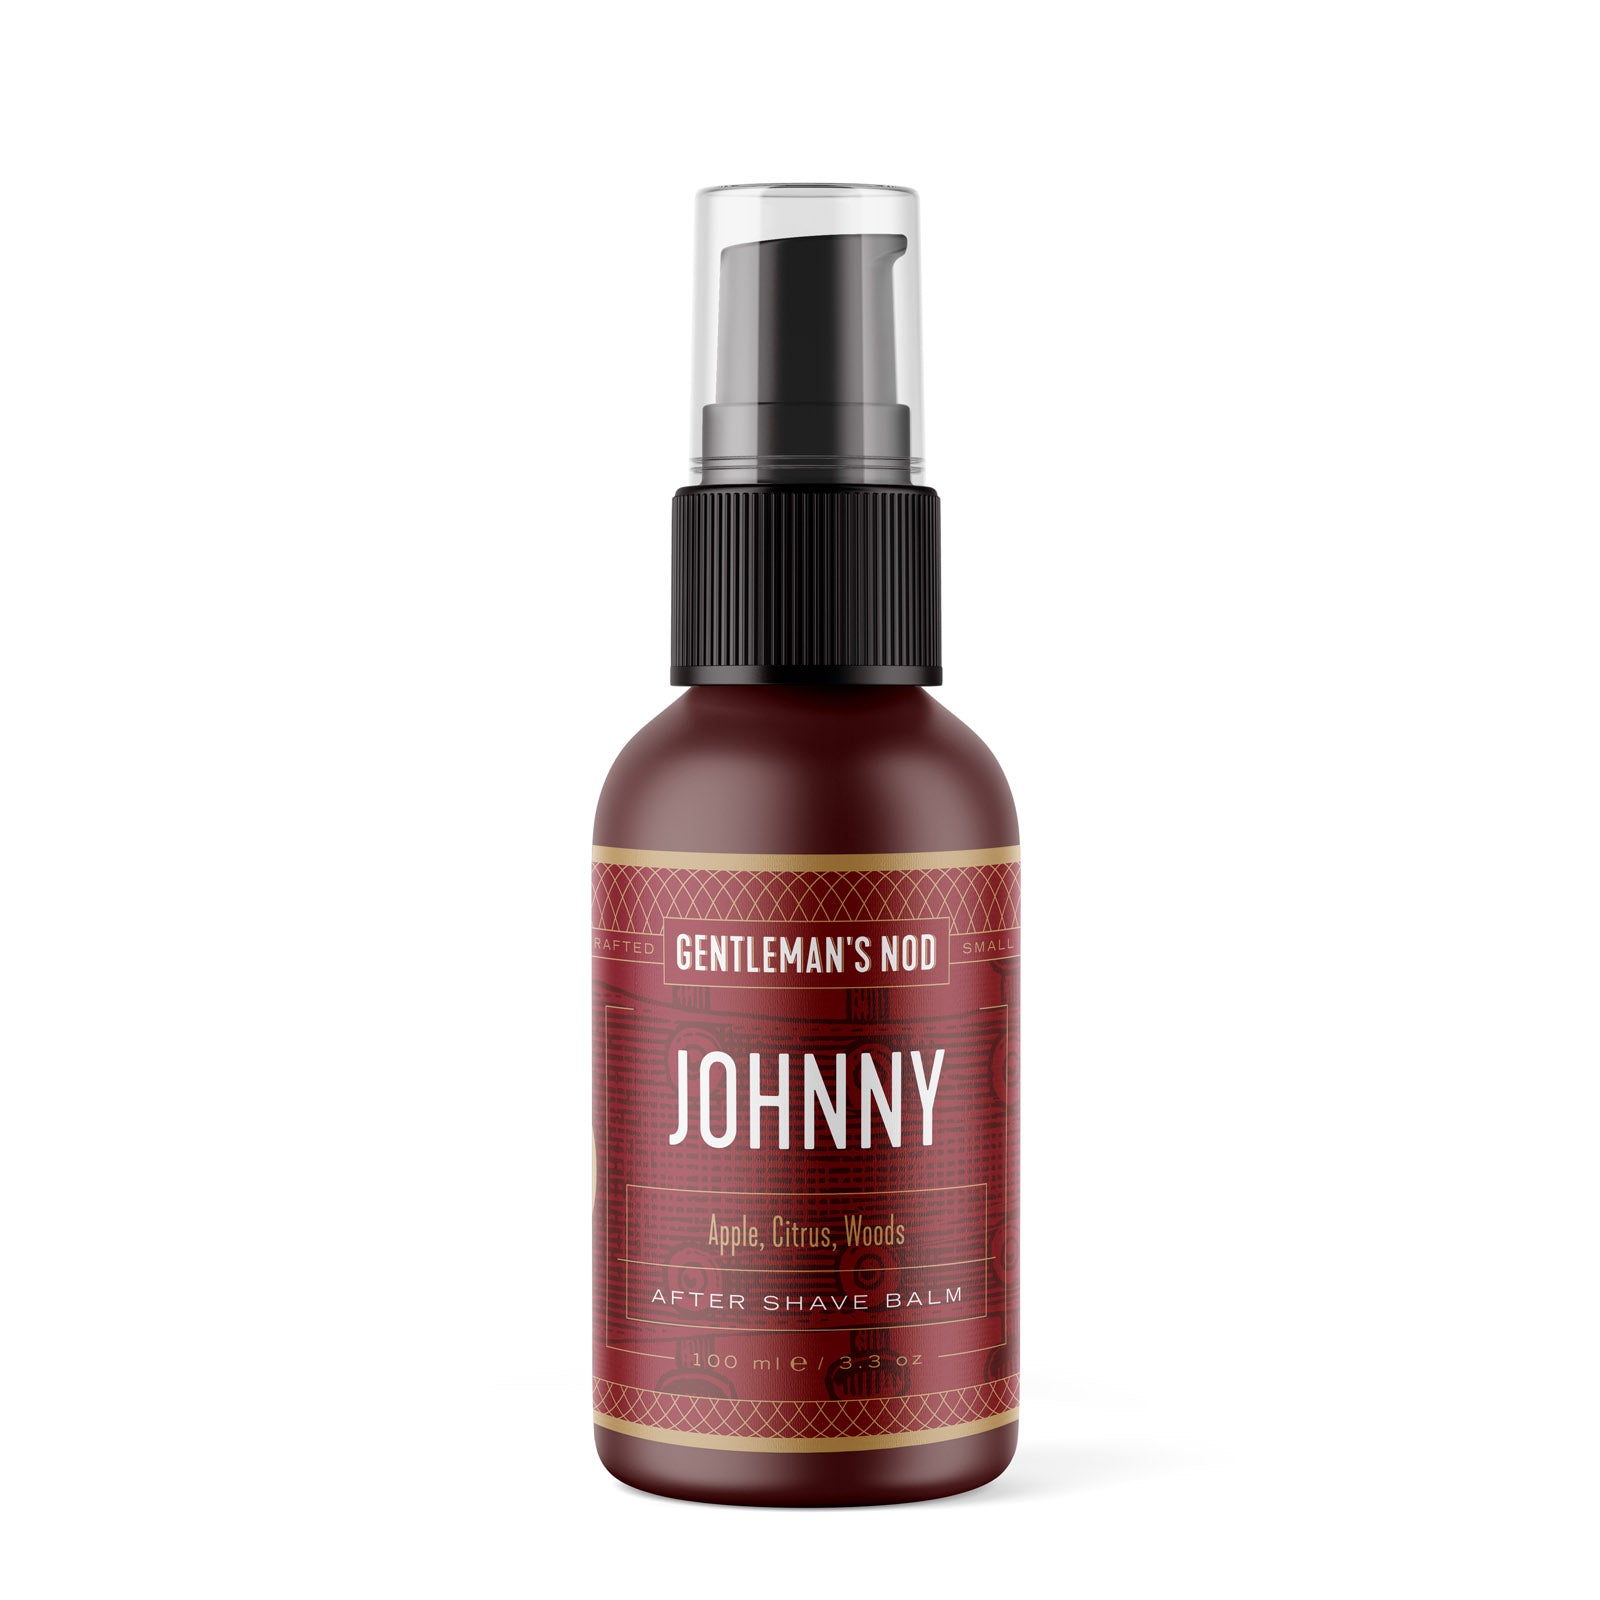 Johnny After Shave Balm